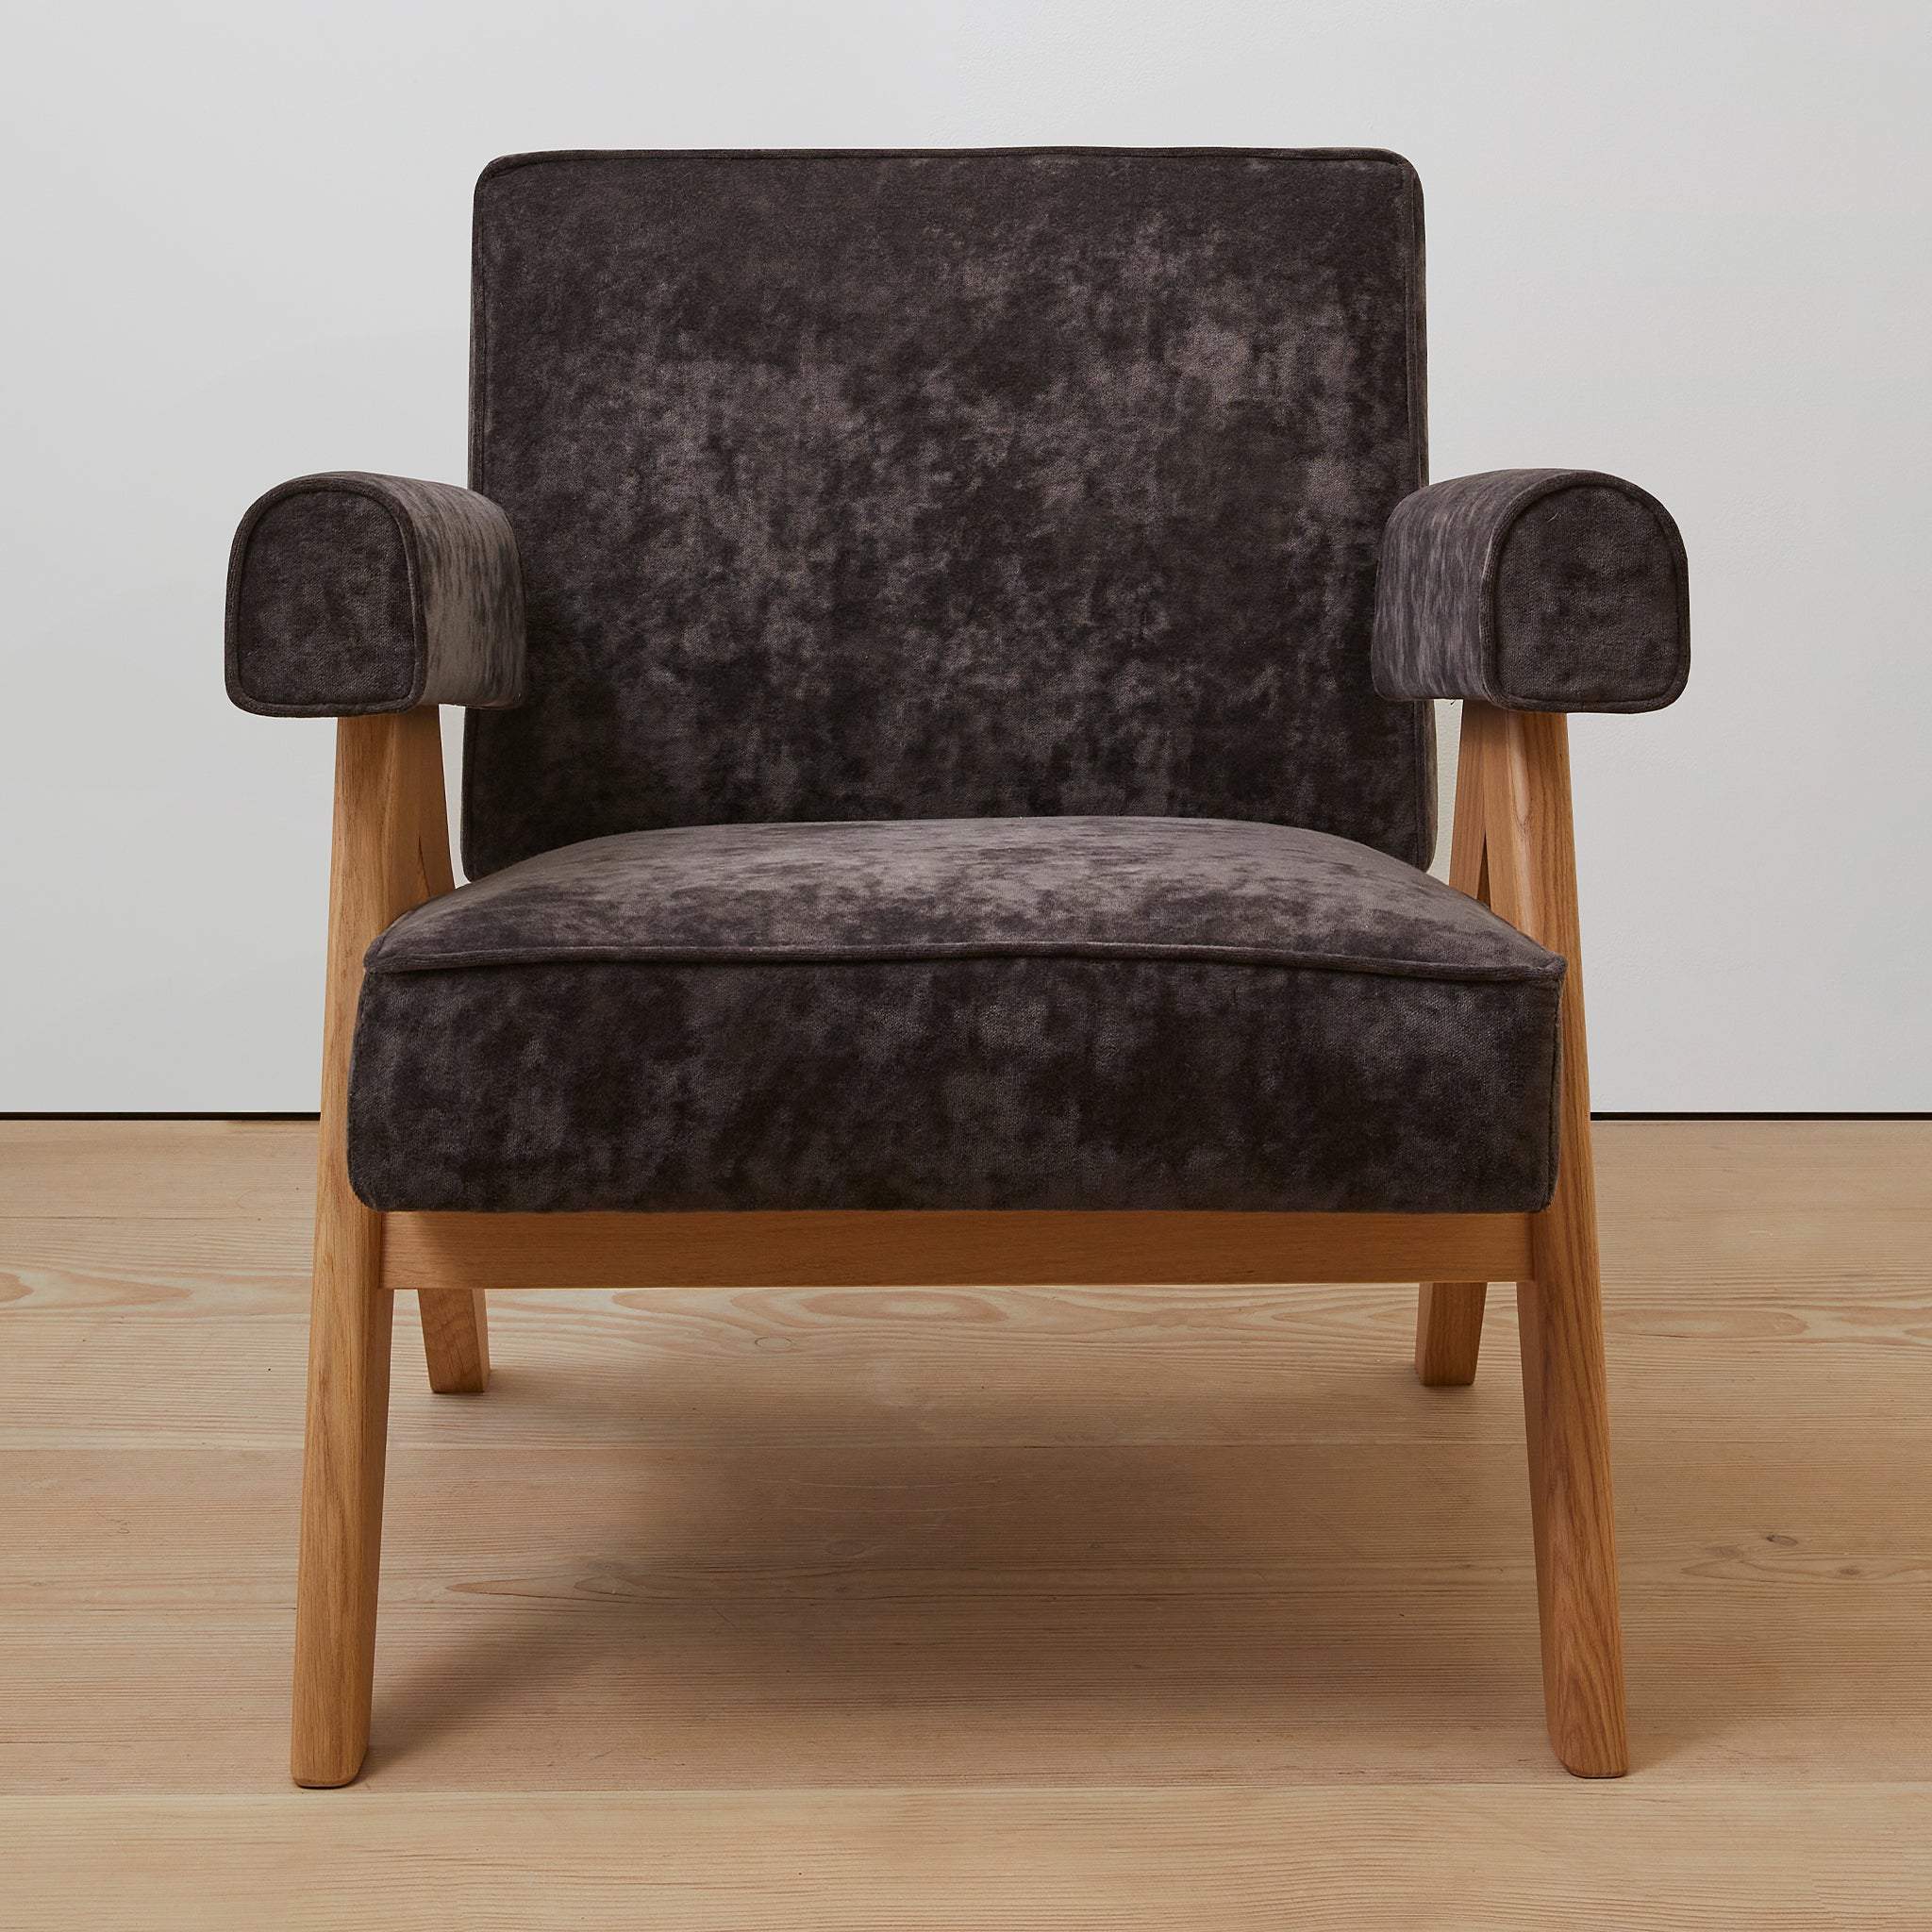 Front view of an authentic chandigarh lounge chair, pierre jeanneret era, natural oak frame, chocolate brown mohair upholstery, by Klarel #K35-36